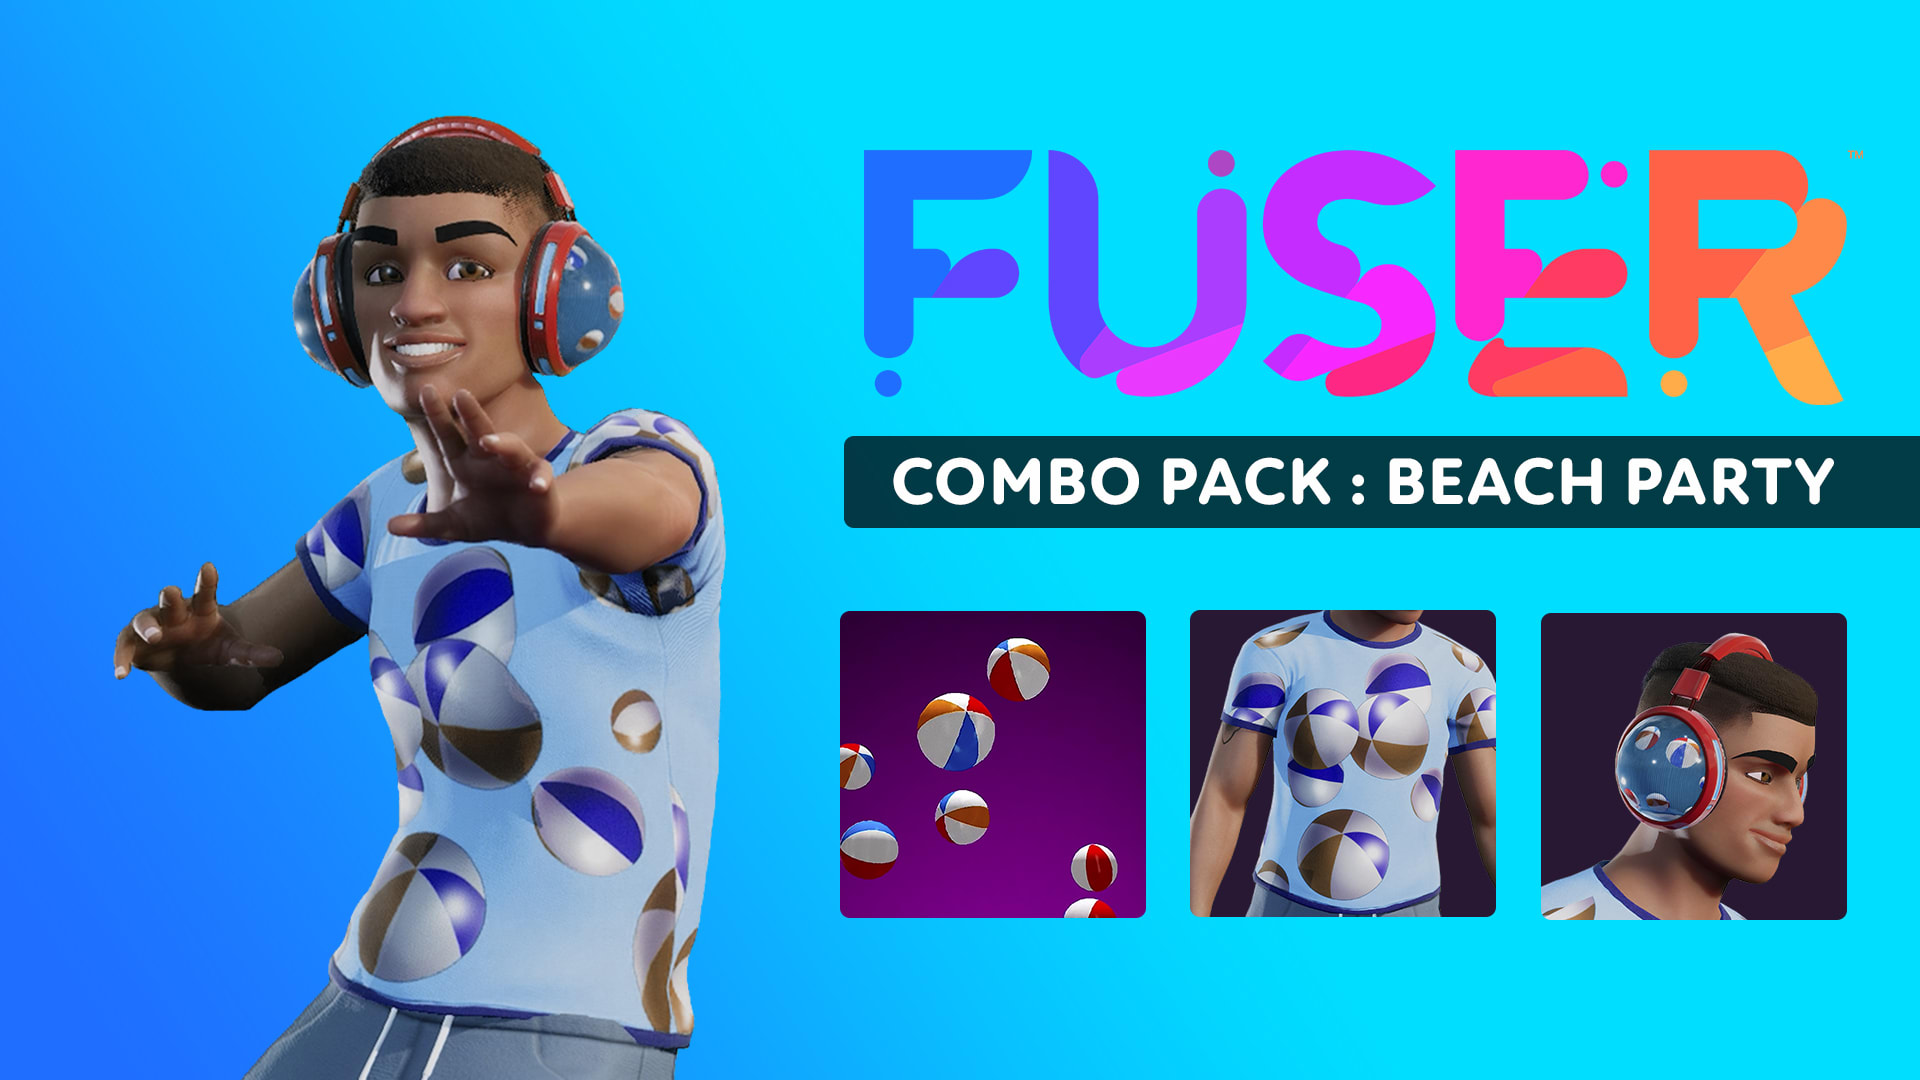 Combo Pack: Beach Party